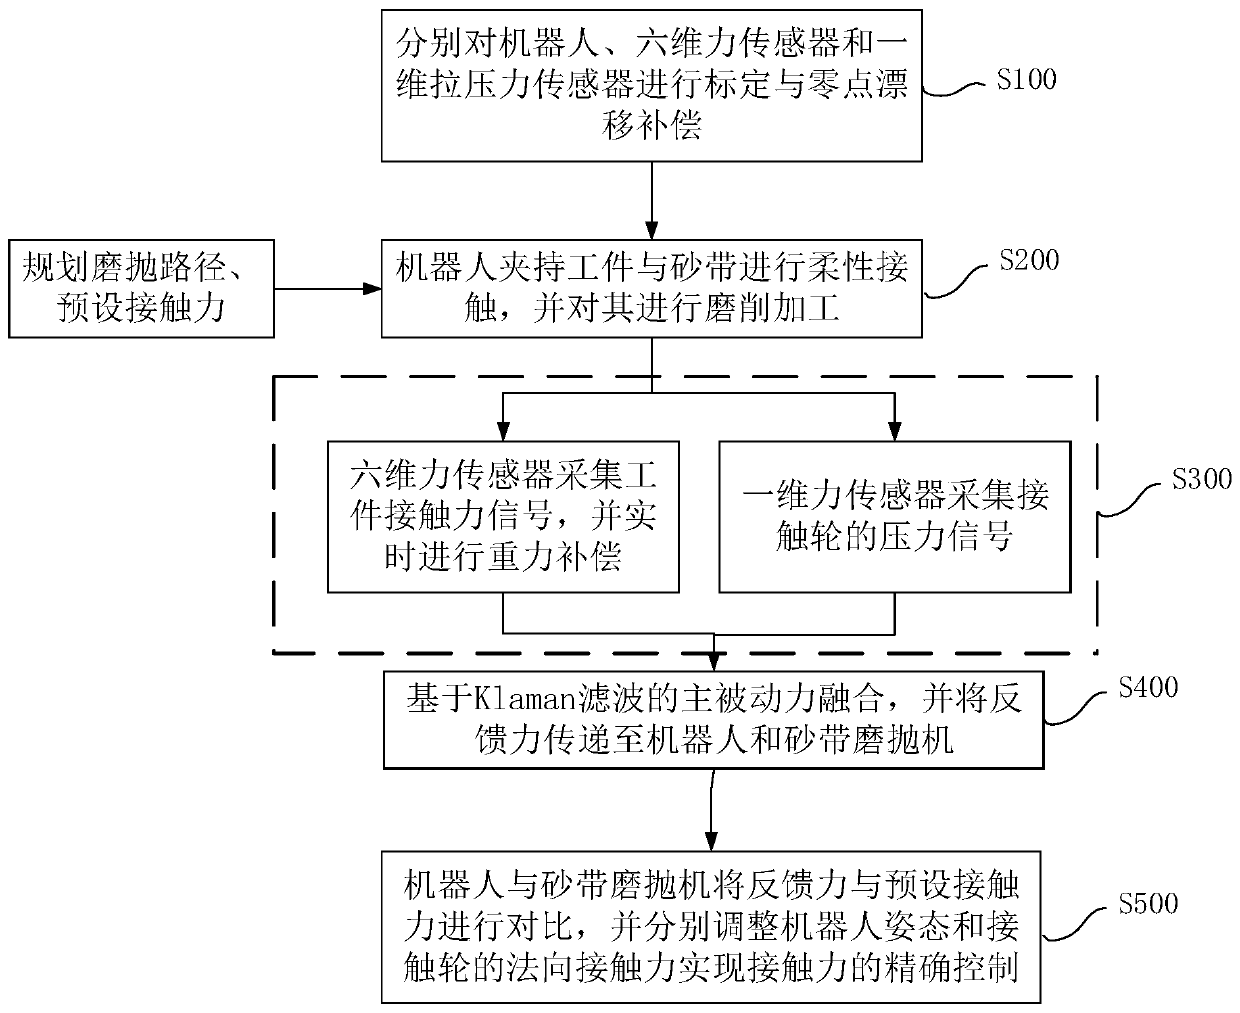 Robot abrasive belt grinding method and system combining active and passive force control